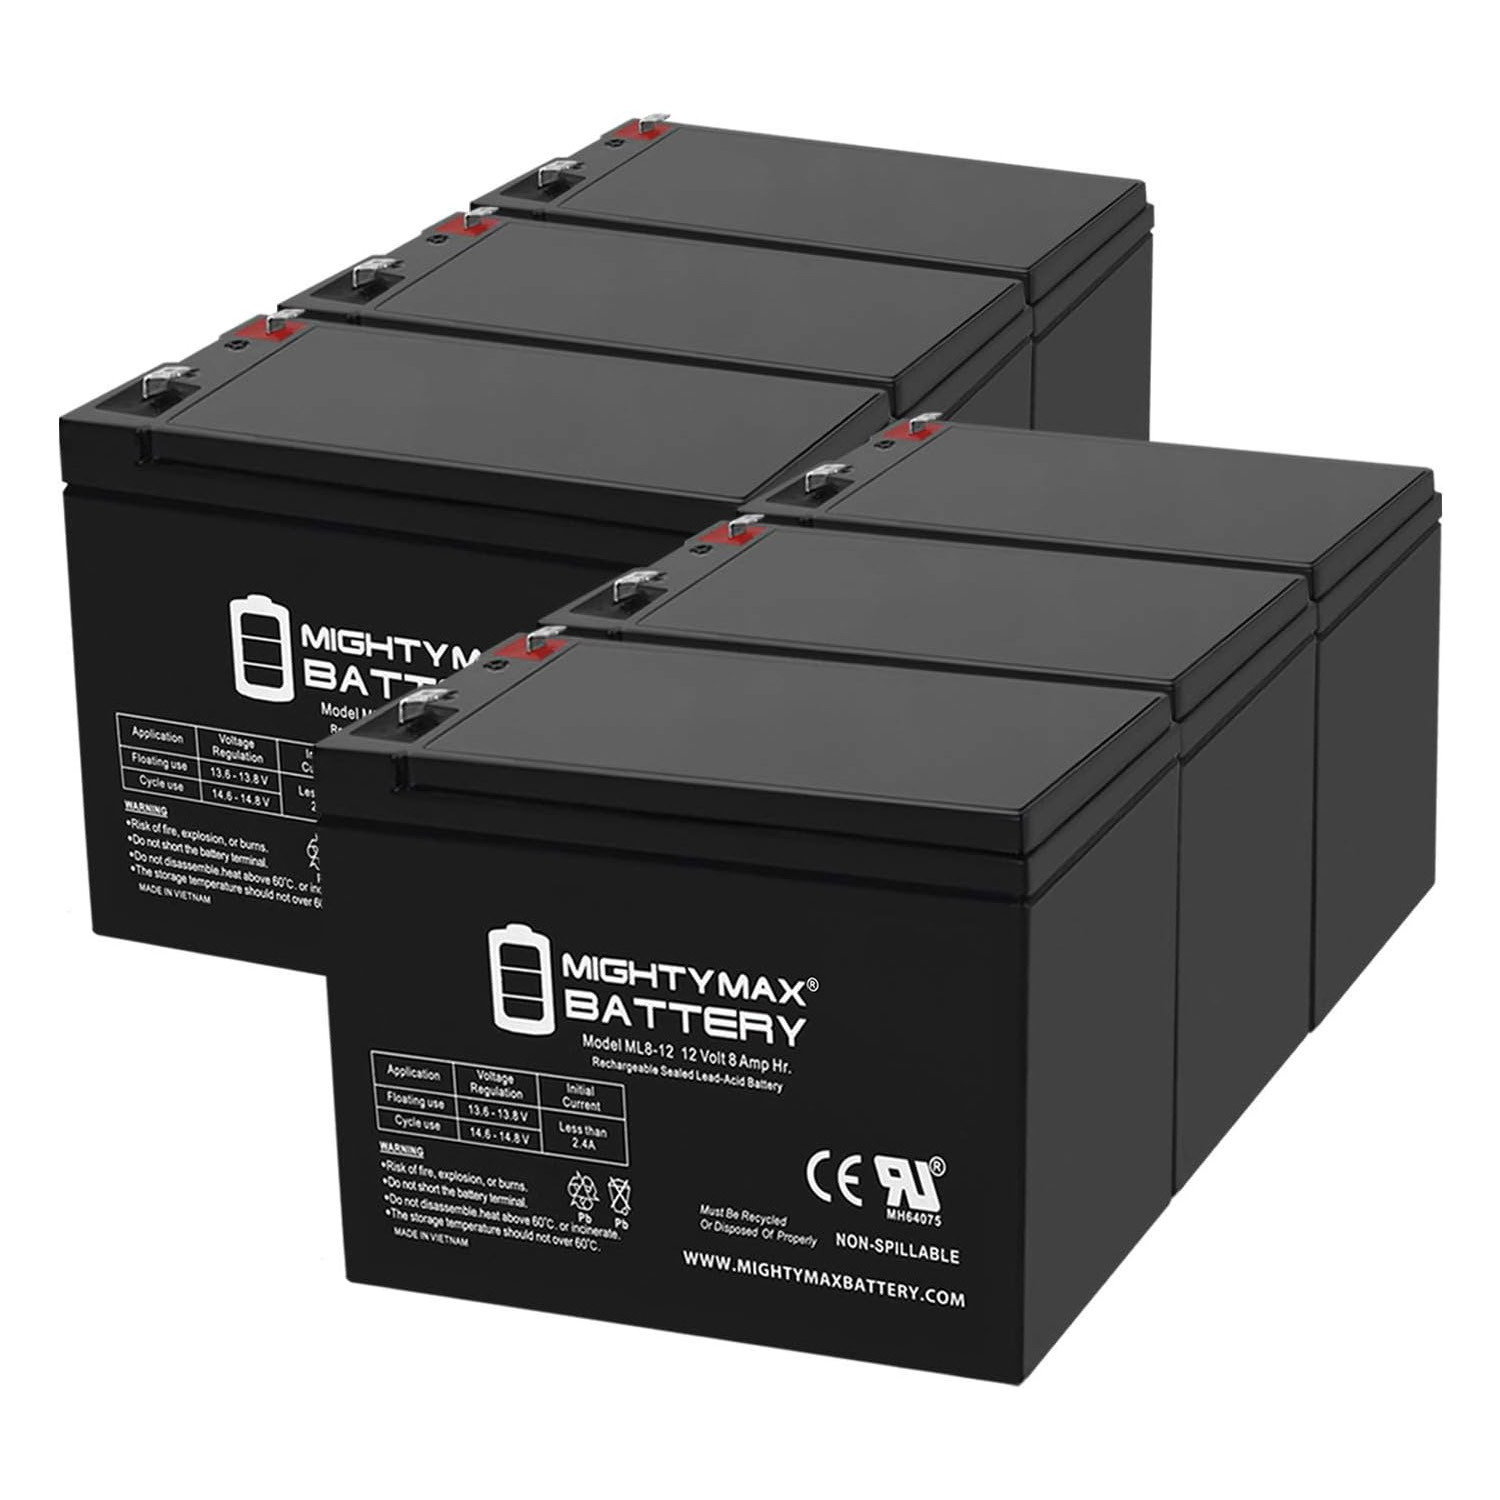 12V 8Ah SLA Replacement Battery for Powervar ABCE 1100-11R 1440-11IEC - 6 Pack